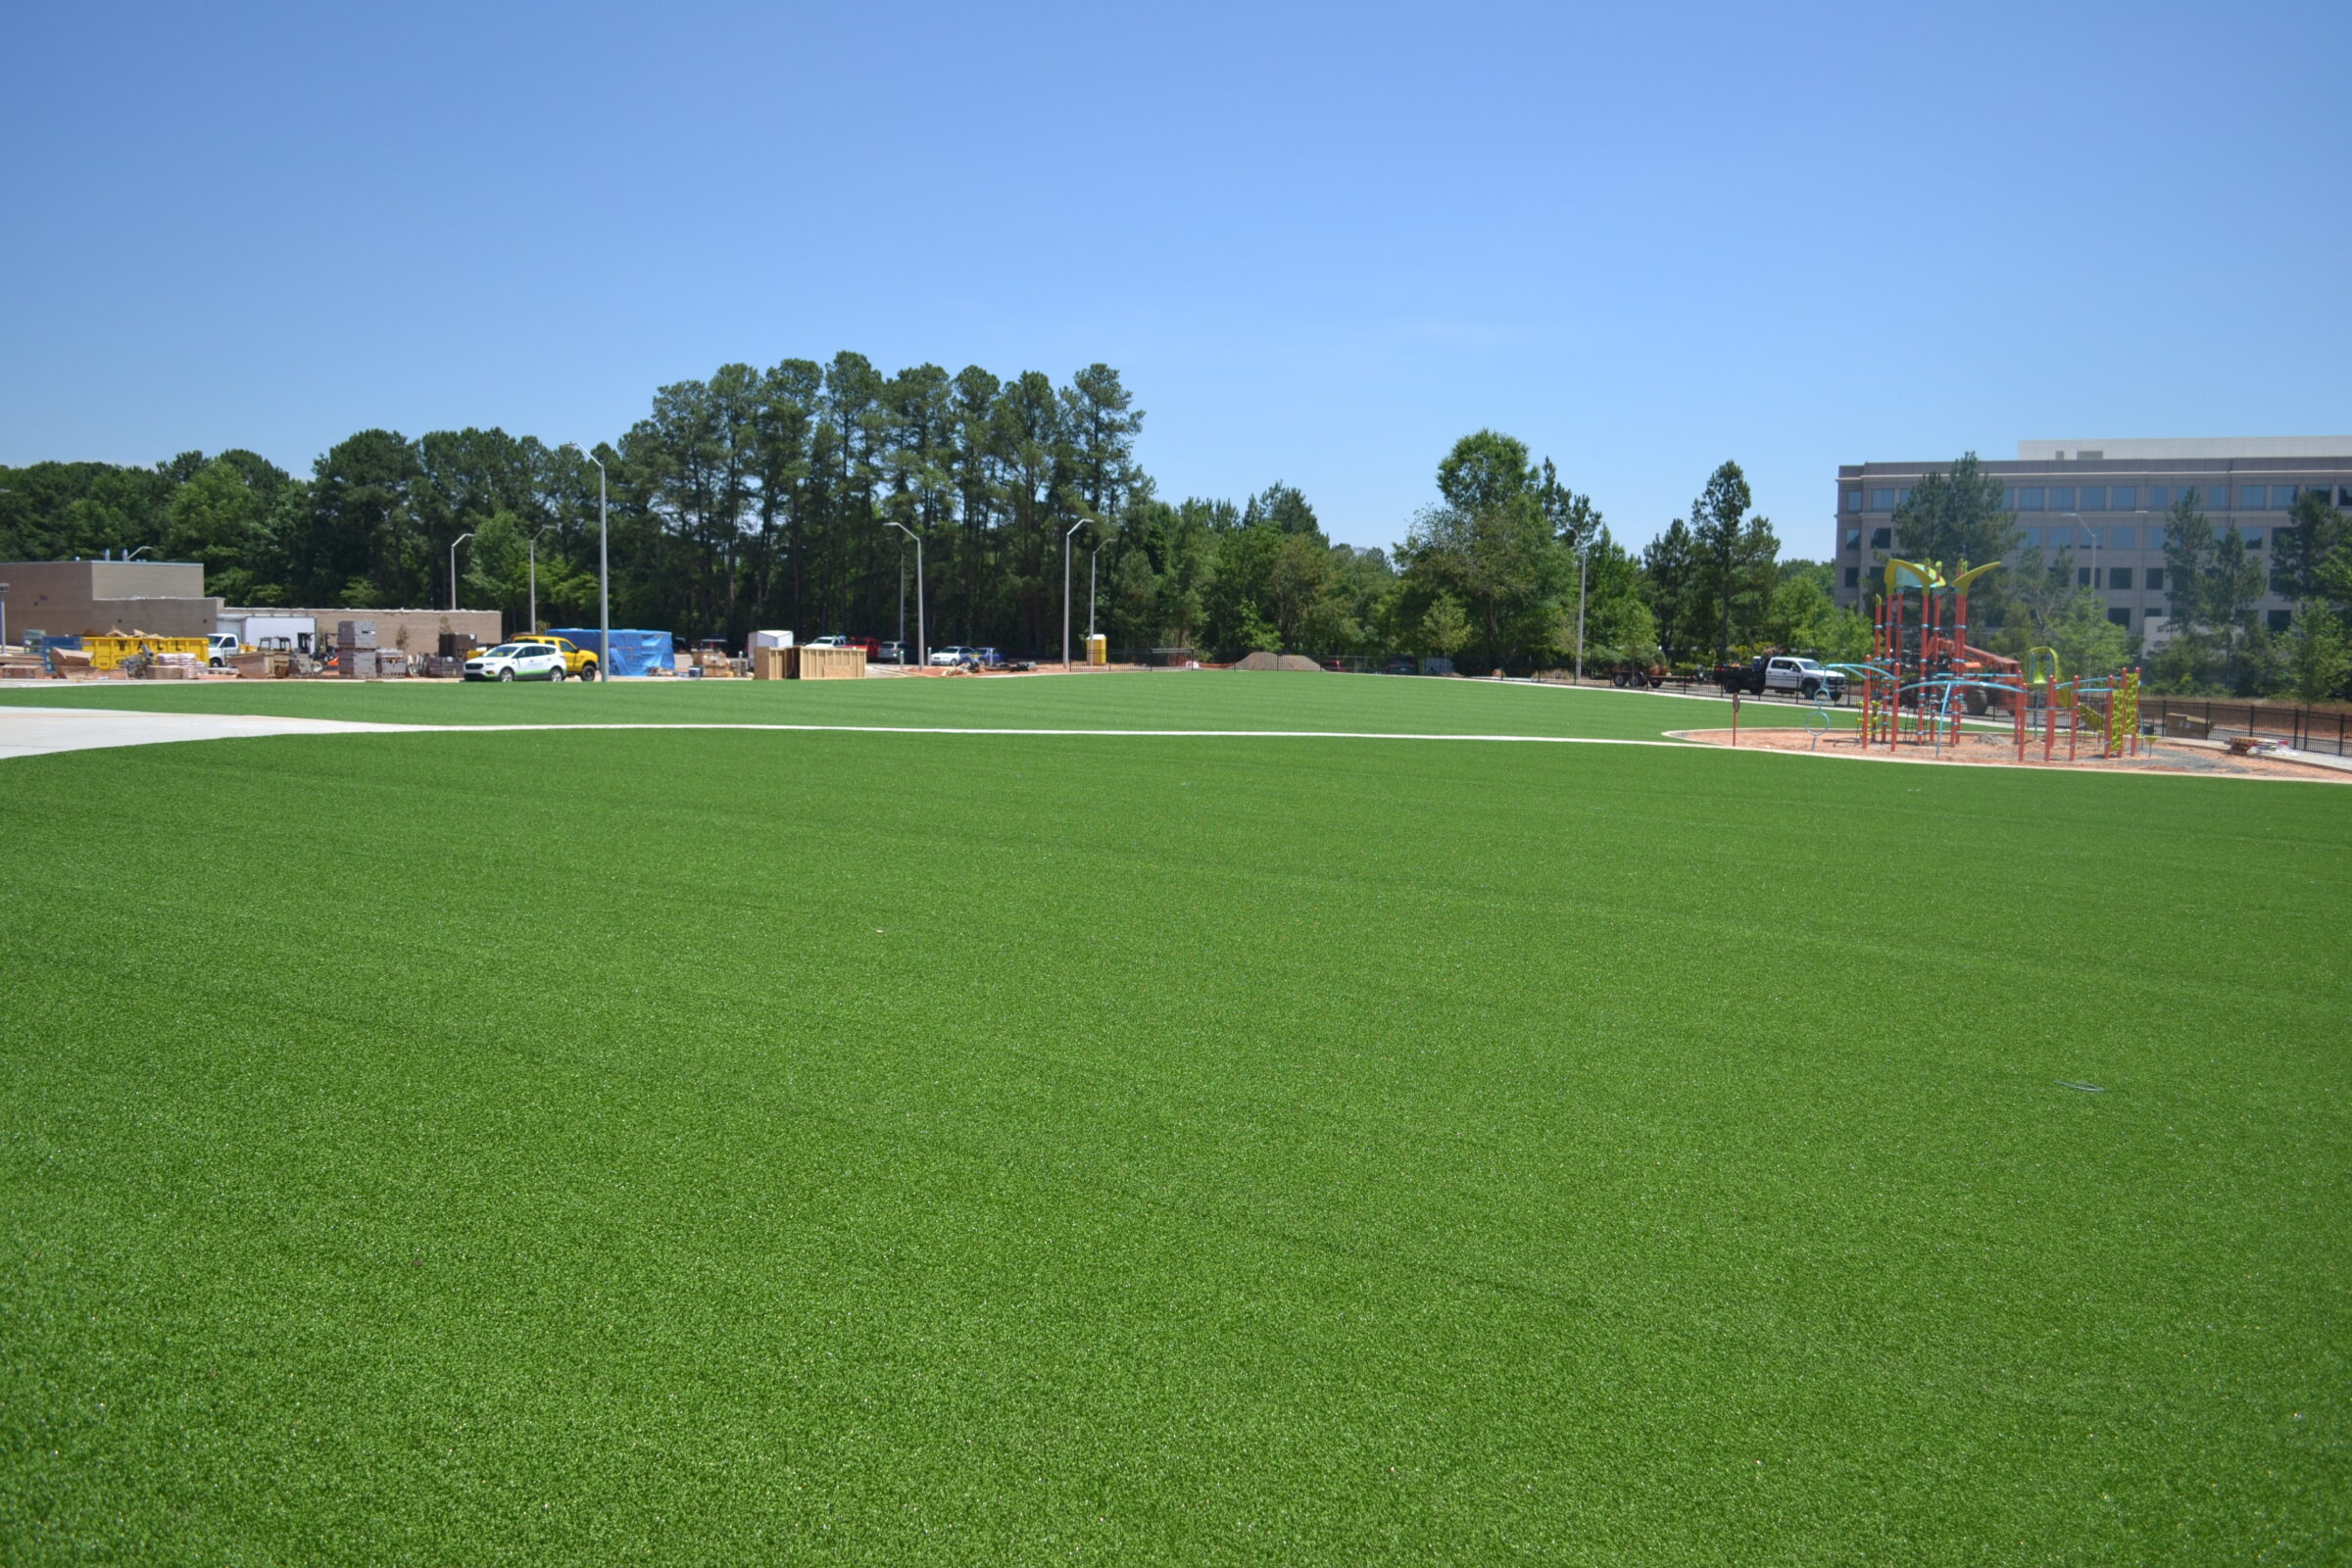 A vibrant artificial turf field, clear skies, bordering woodland, playground equipment in the distance, with urban buildings and parked cars observable.